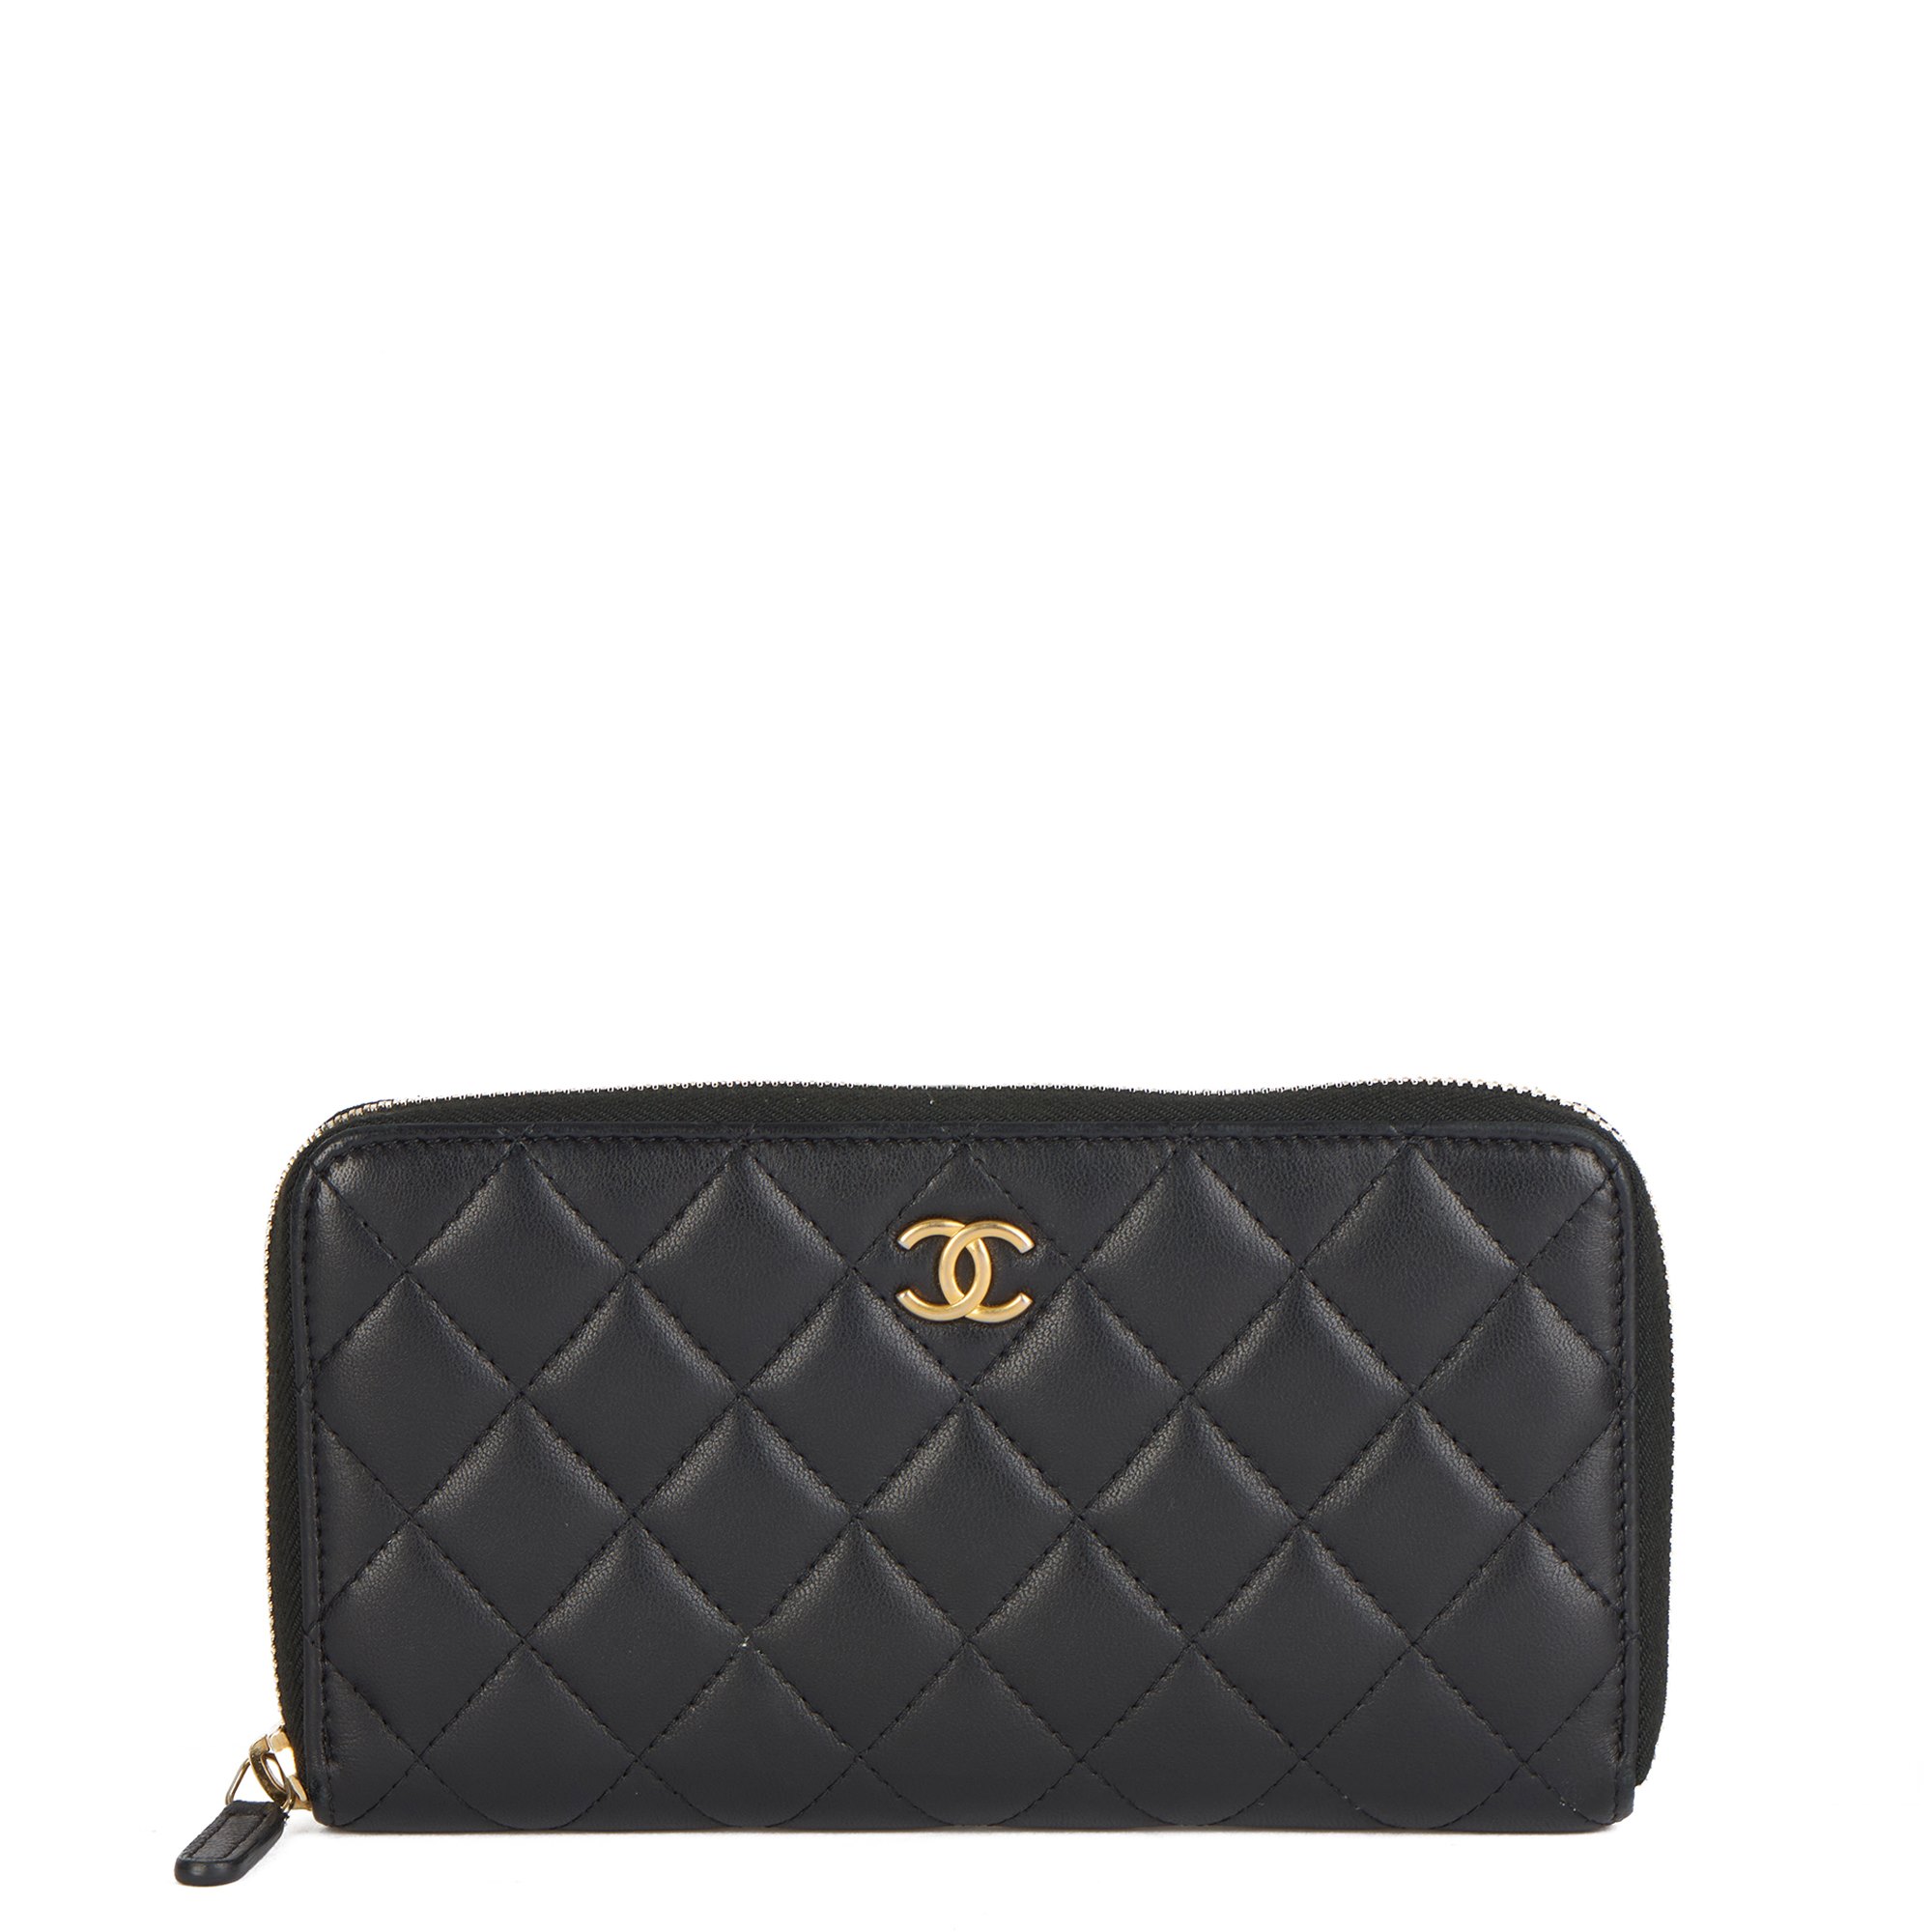 Chanel Black Quilted Caviar Small Boy Zipped Wallet  Chanel Handbags